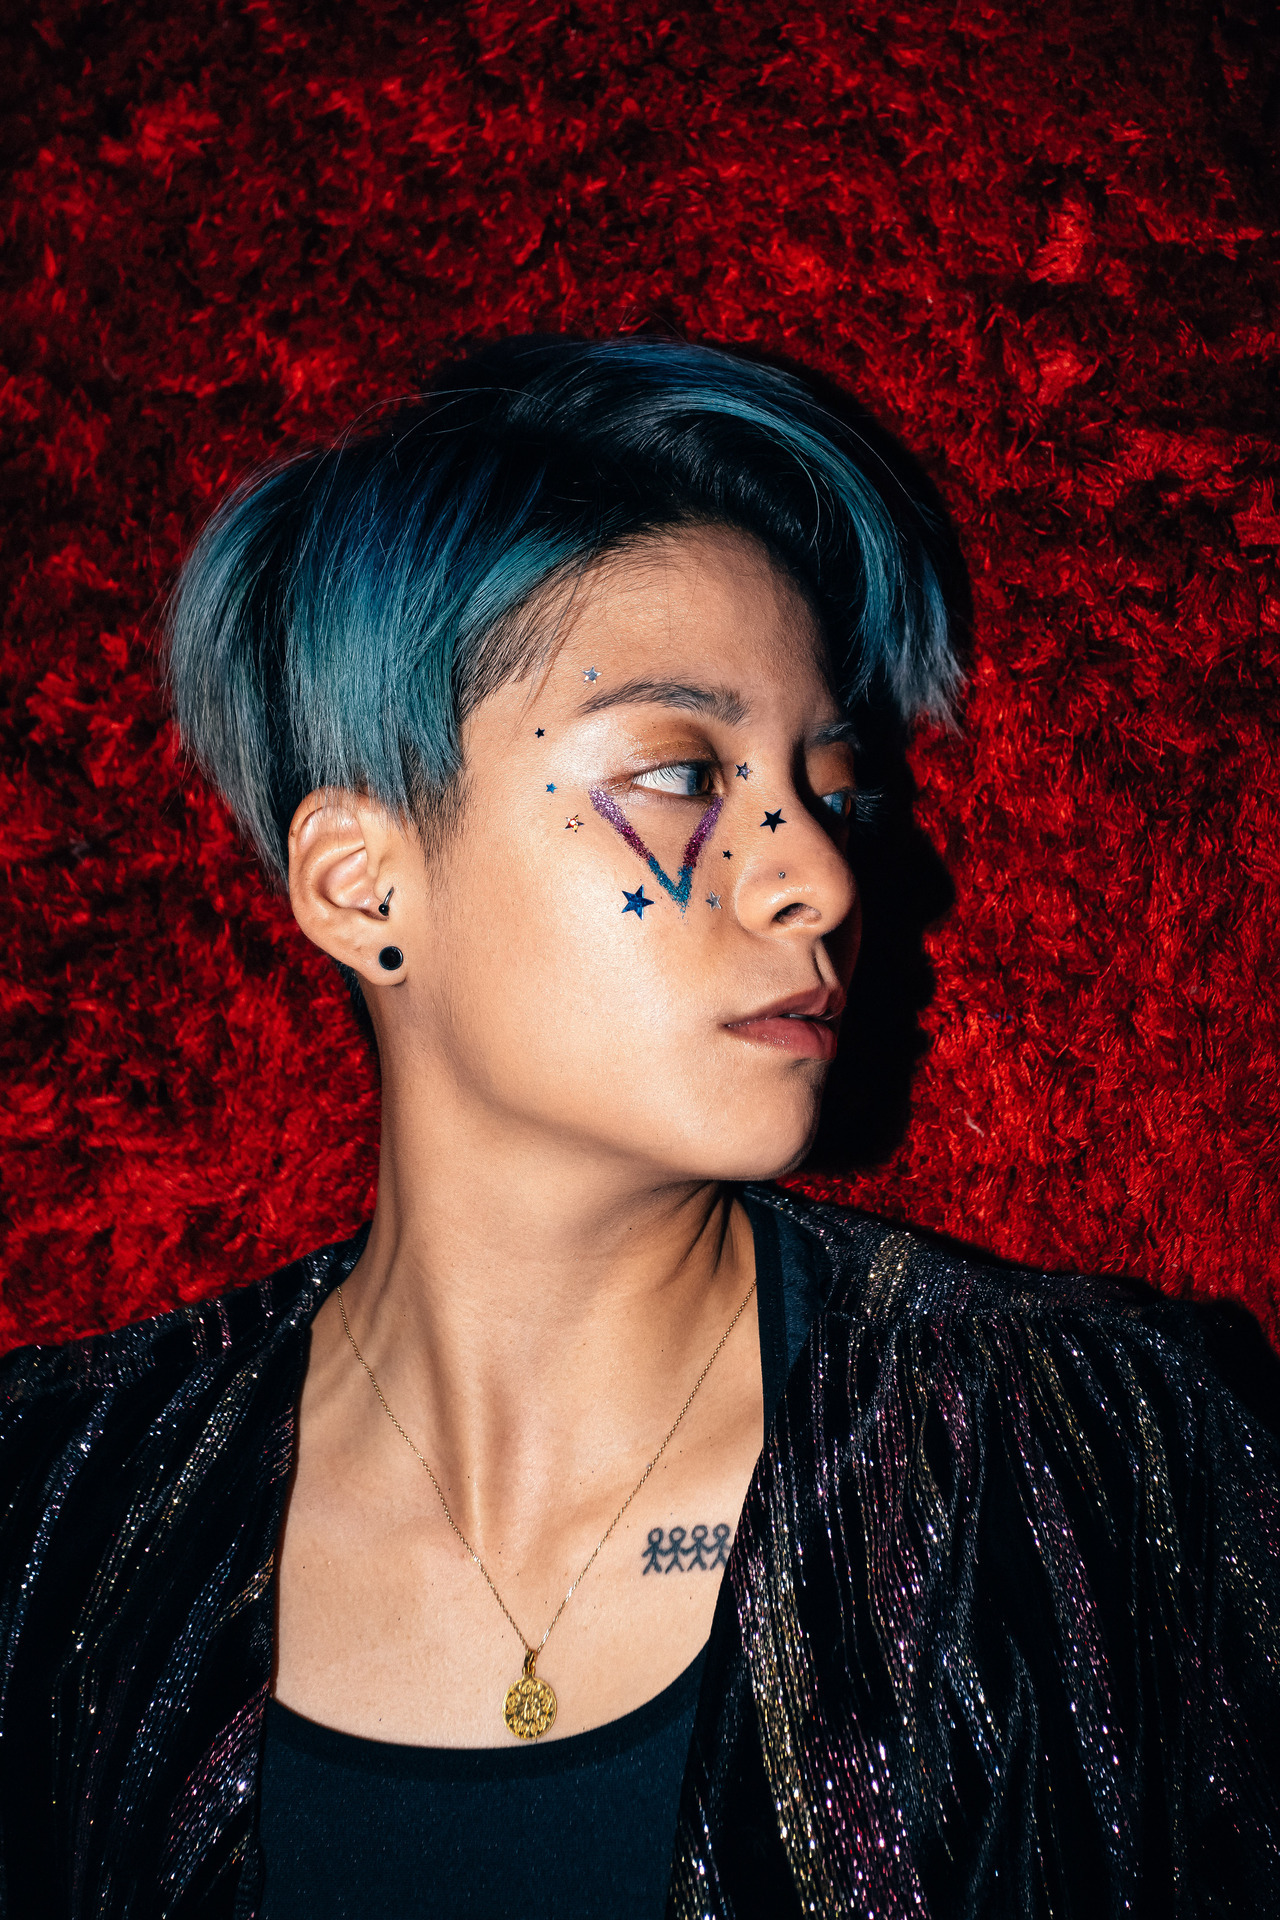 music on tumblr — Music Spotlight Amber Liu In our latest Music...